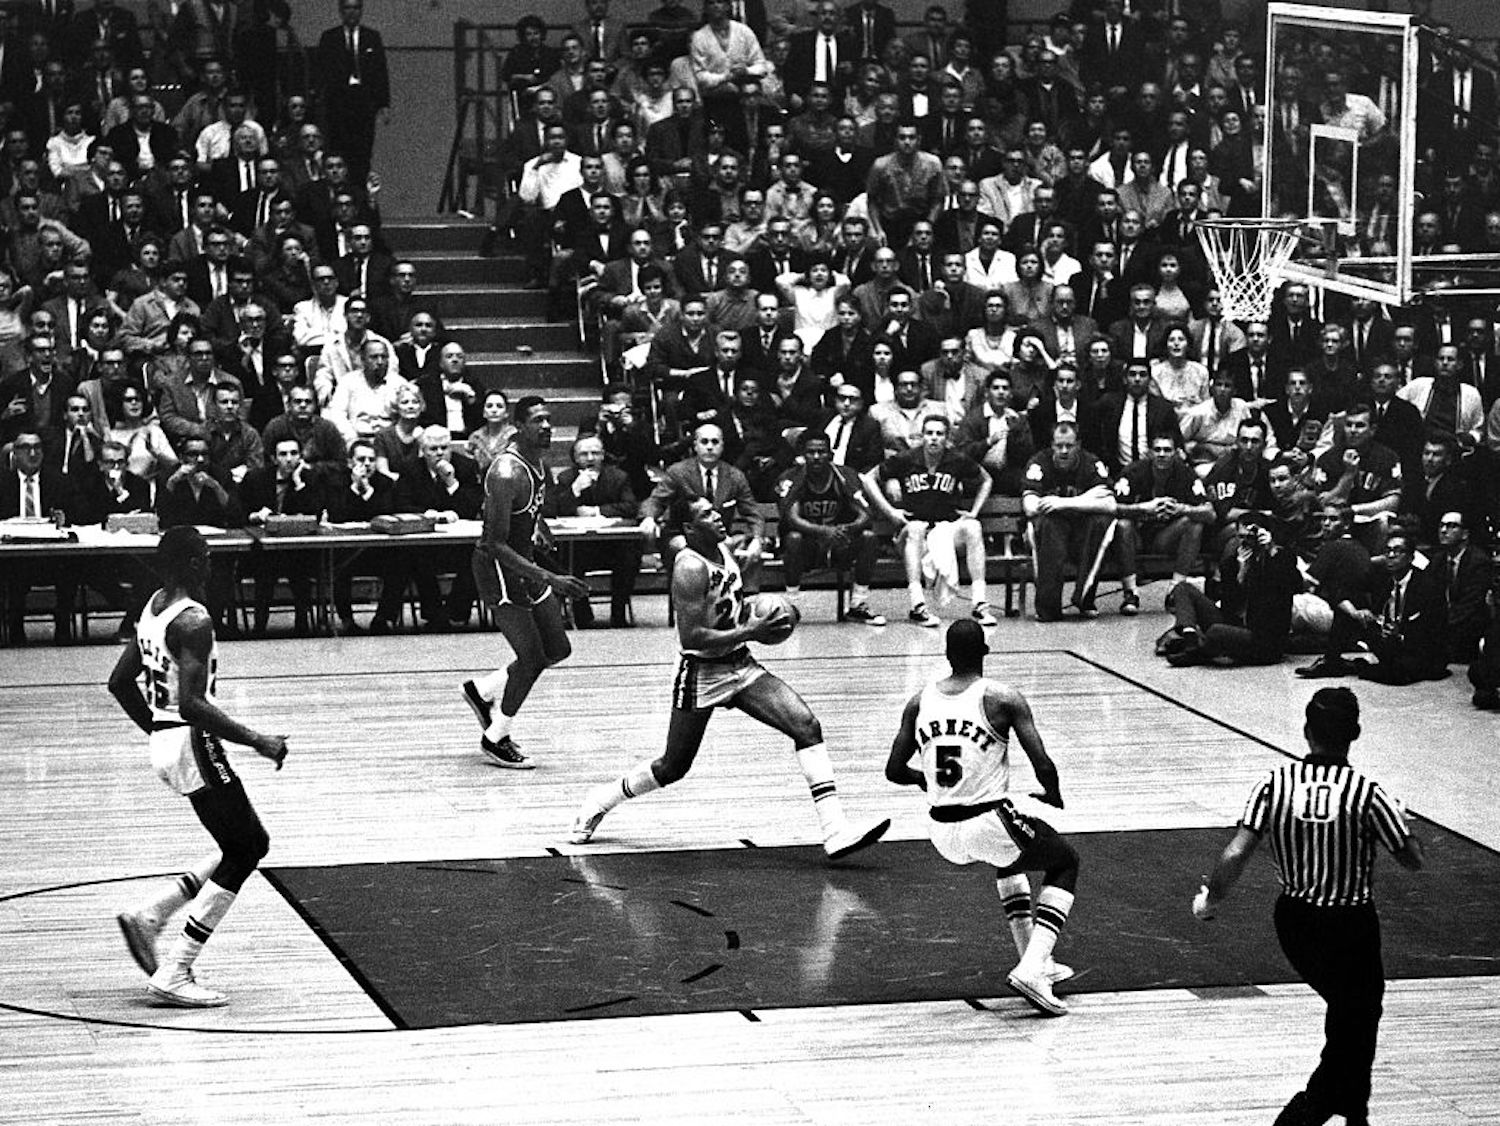 Elgin Baylor's 71-point game is one of the highest in NBA history, but it might not even be the Laker legend's best performance as a pro.